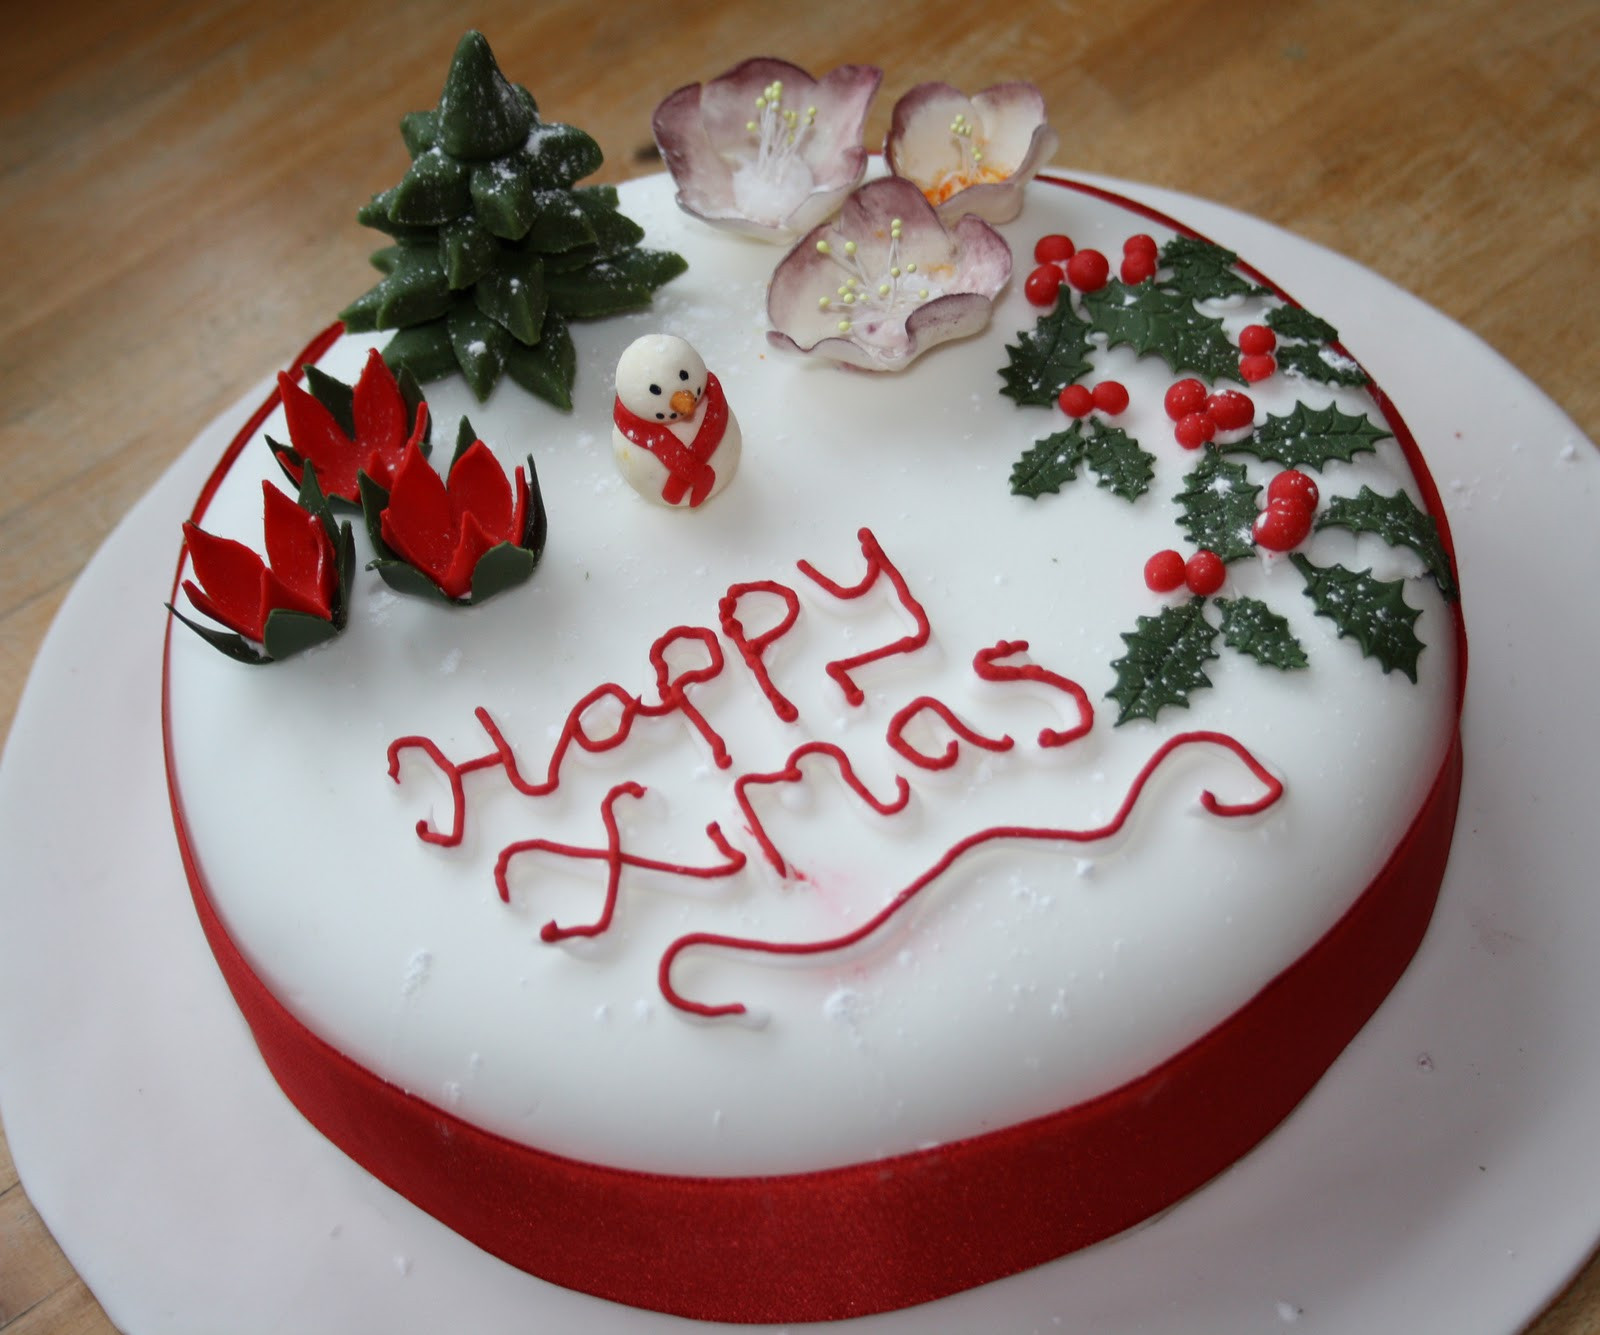 Images Of Christmas Cakes Decorated
 Decorating the Christmas Cake